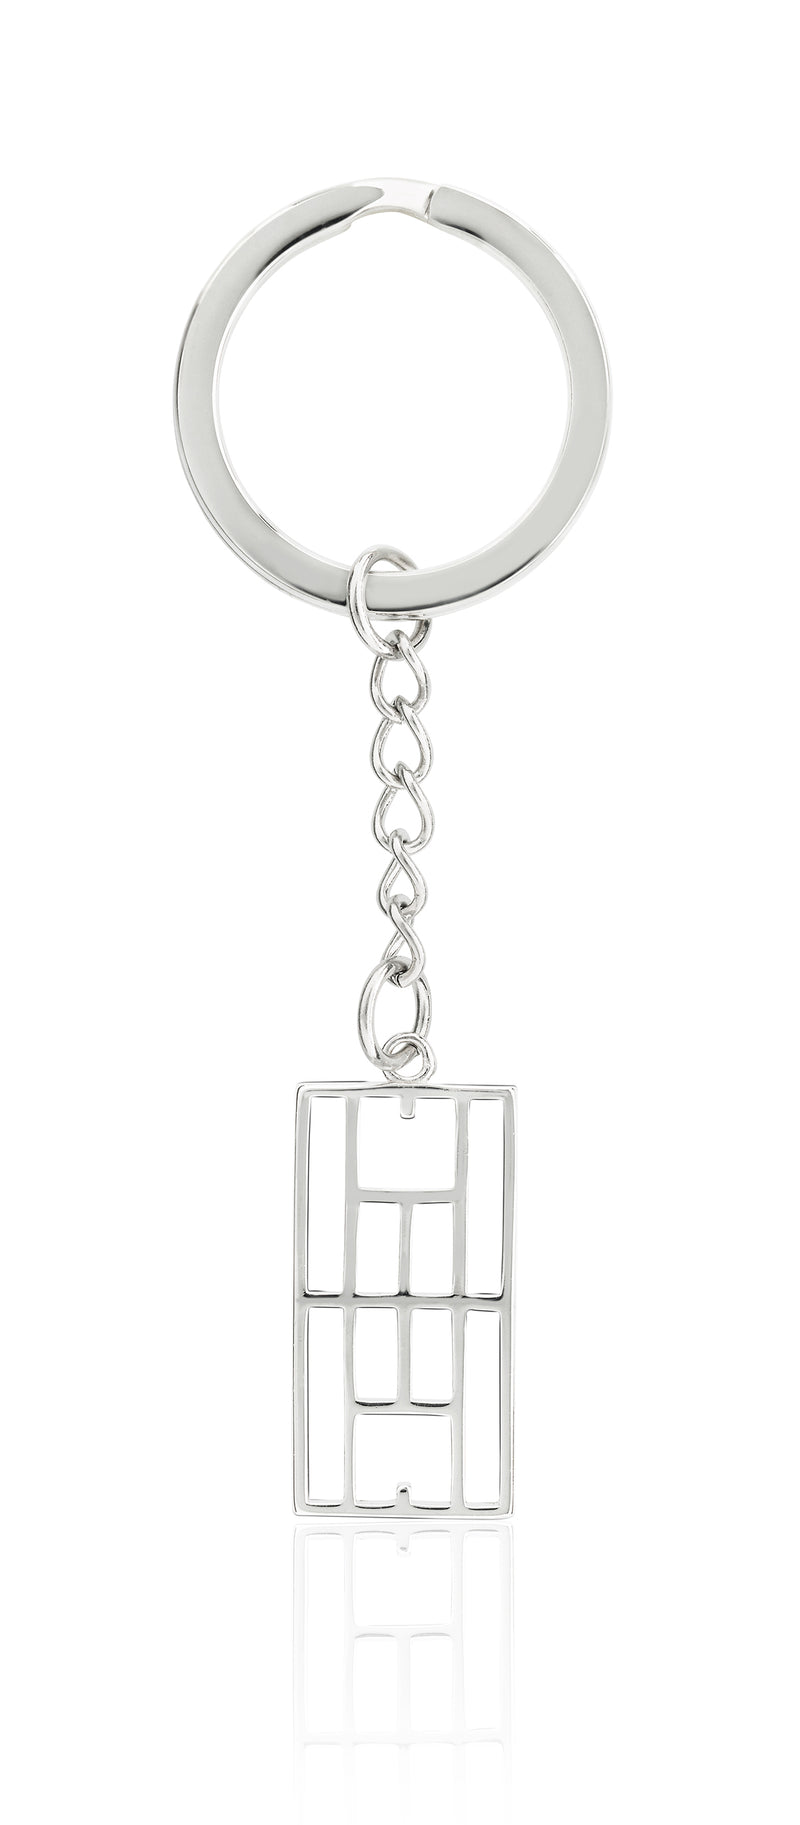 Calling the Lines Tennis Key Ring